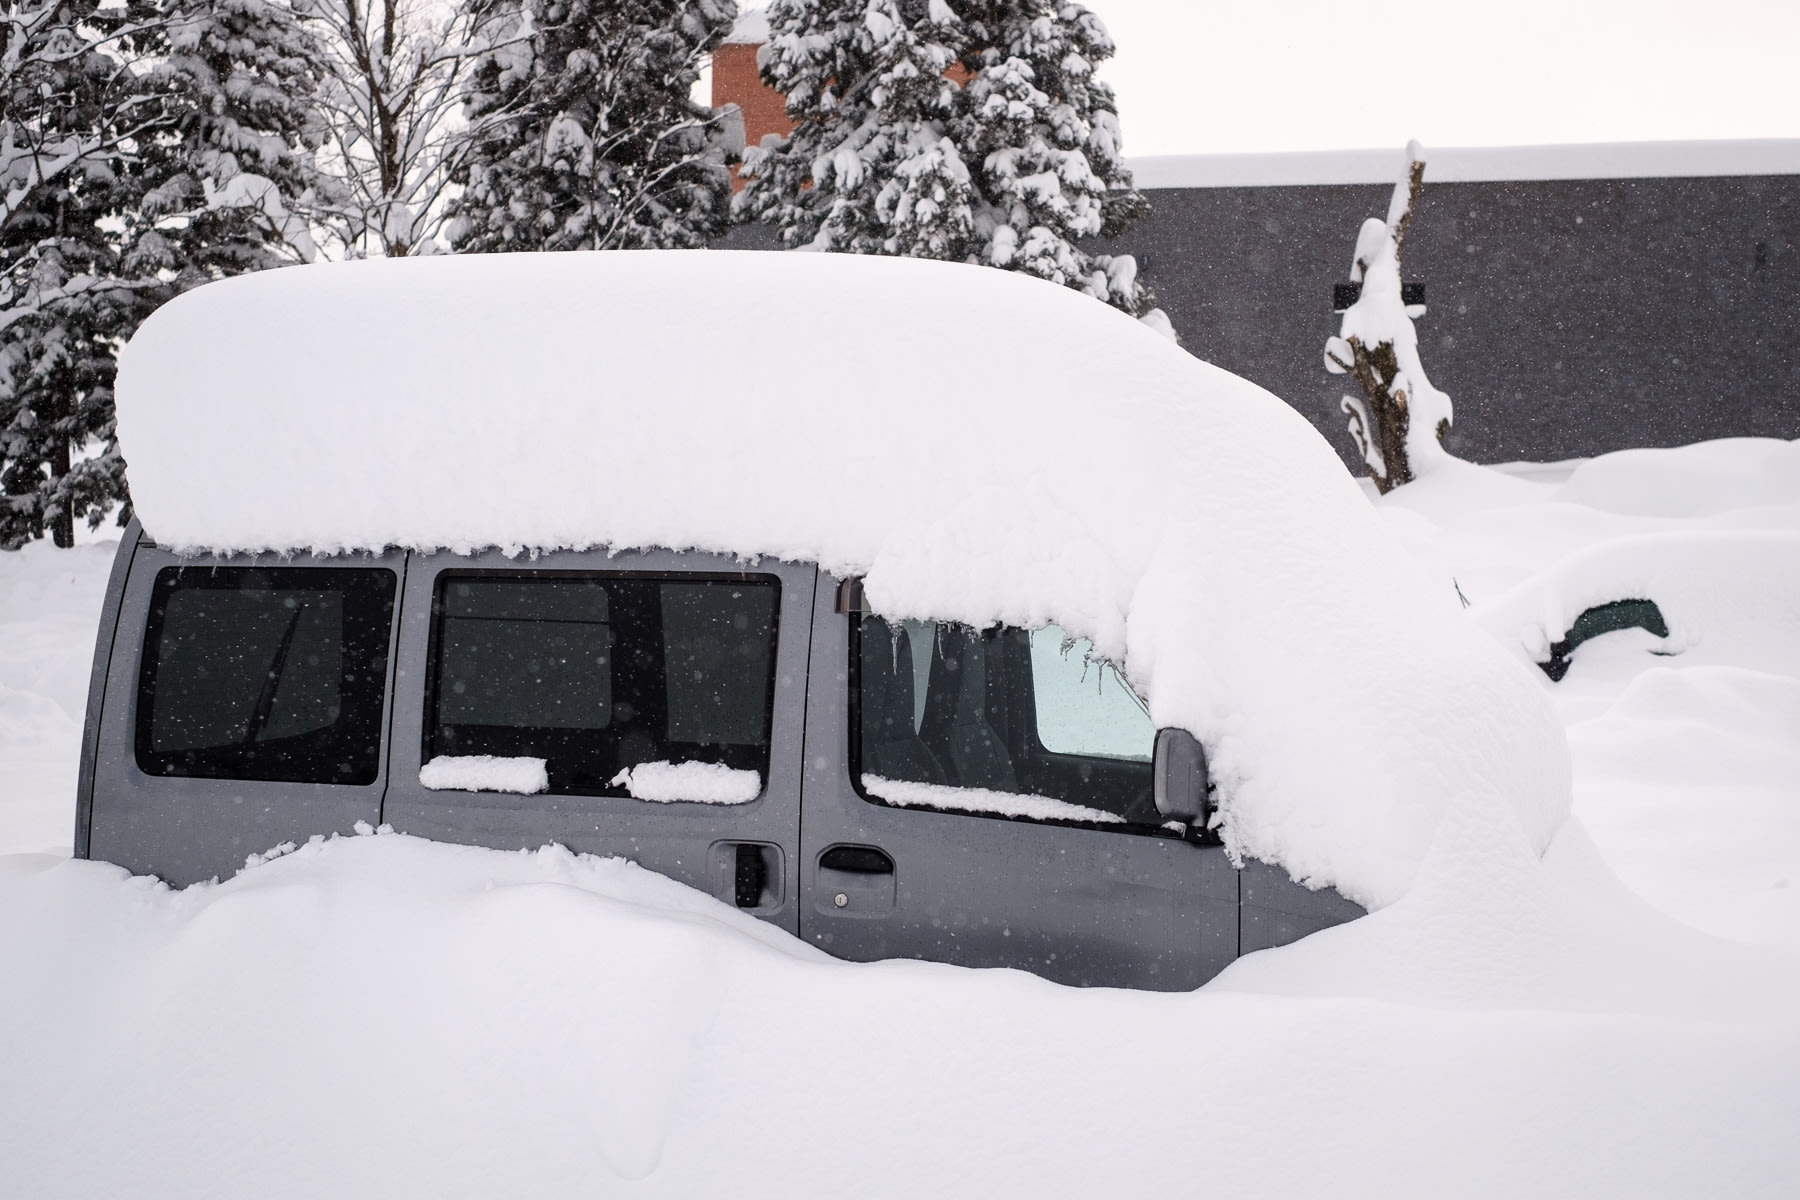 A car sits buried under a metre of snow. Only the windows are visible.